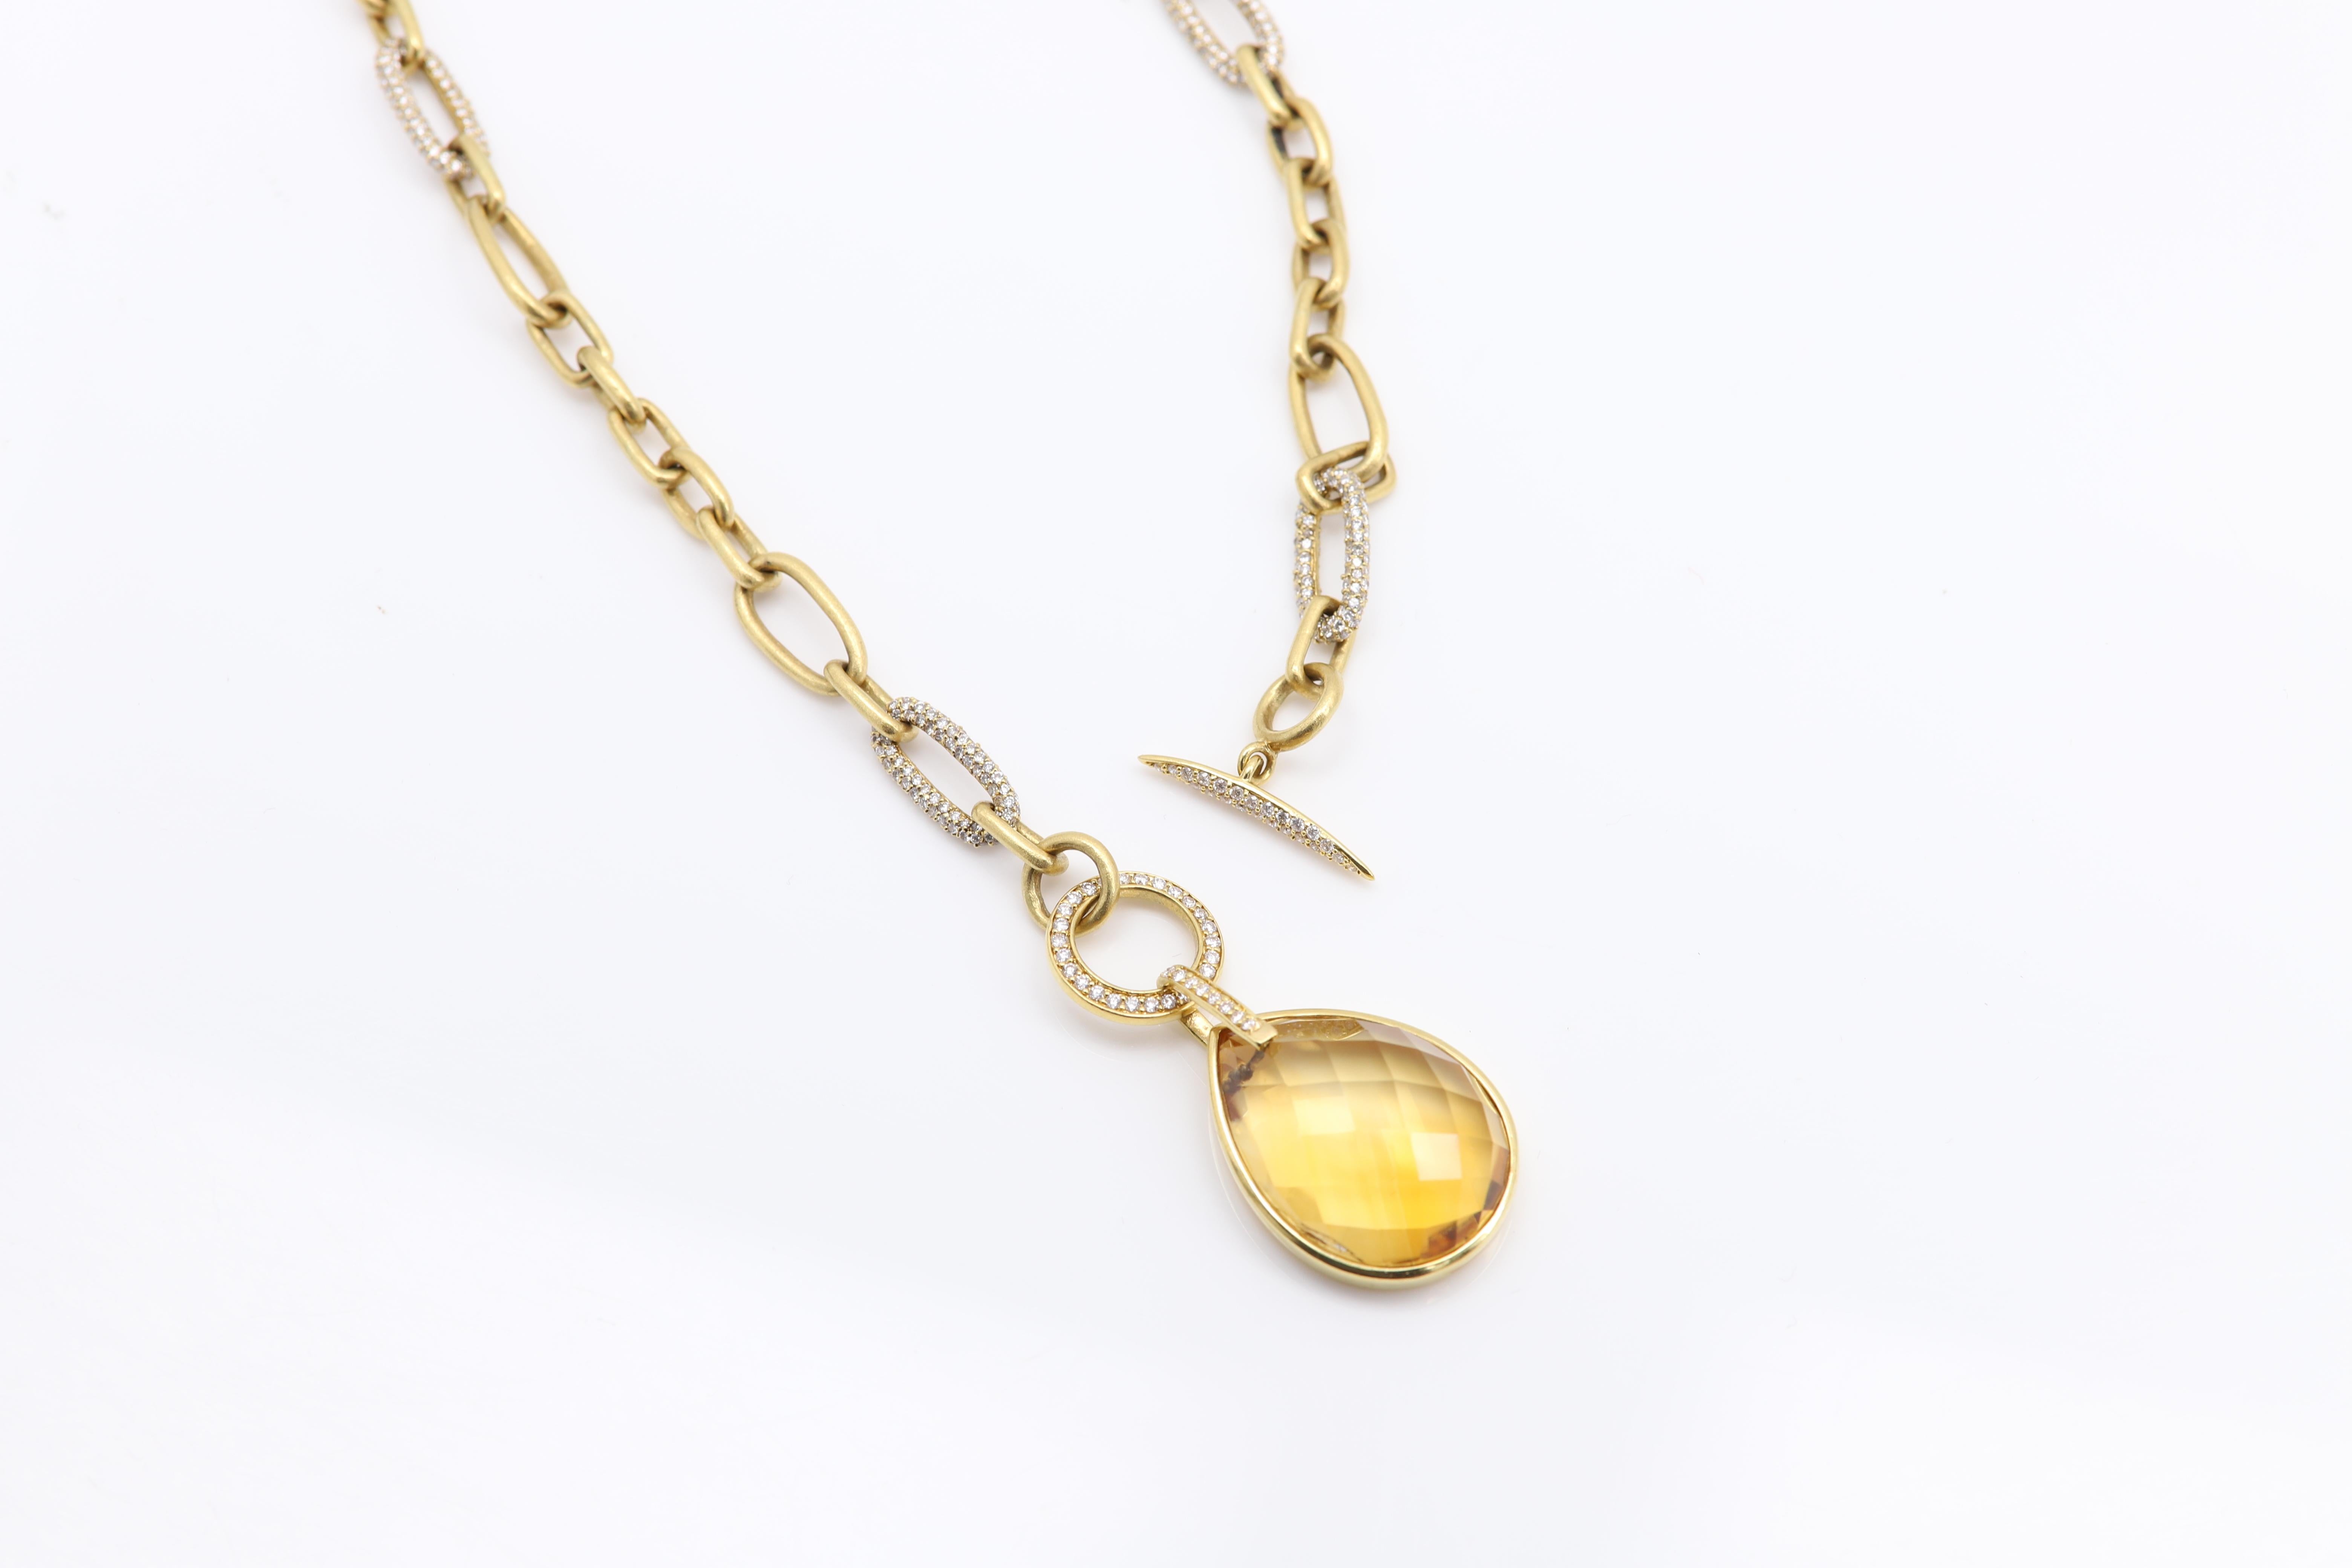 Unique Paperclip style chain with diamond links and center large Yellow Citrine Gemstone
18k Yellow Gold total 51 grams
Chain Length 16.5' inch
Center has a trendy toggle Lock
Center Citrine size approx  26 x 19 mm Pear shape
Average Link size